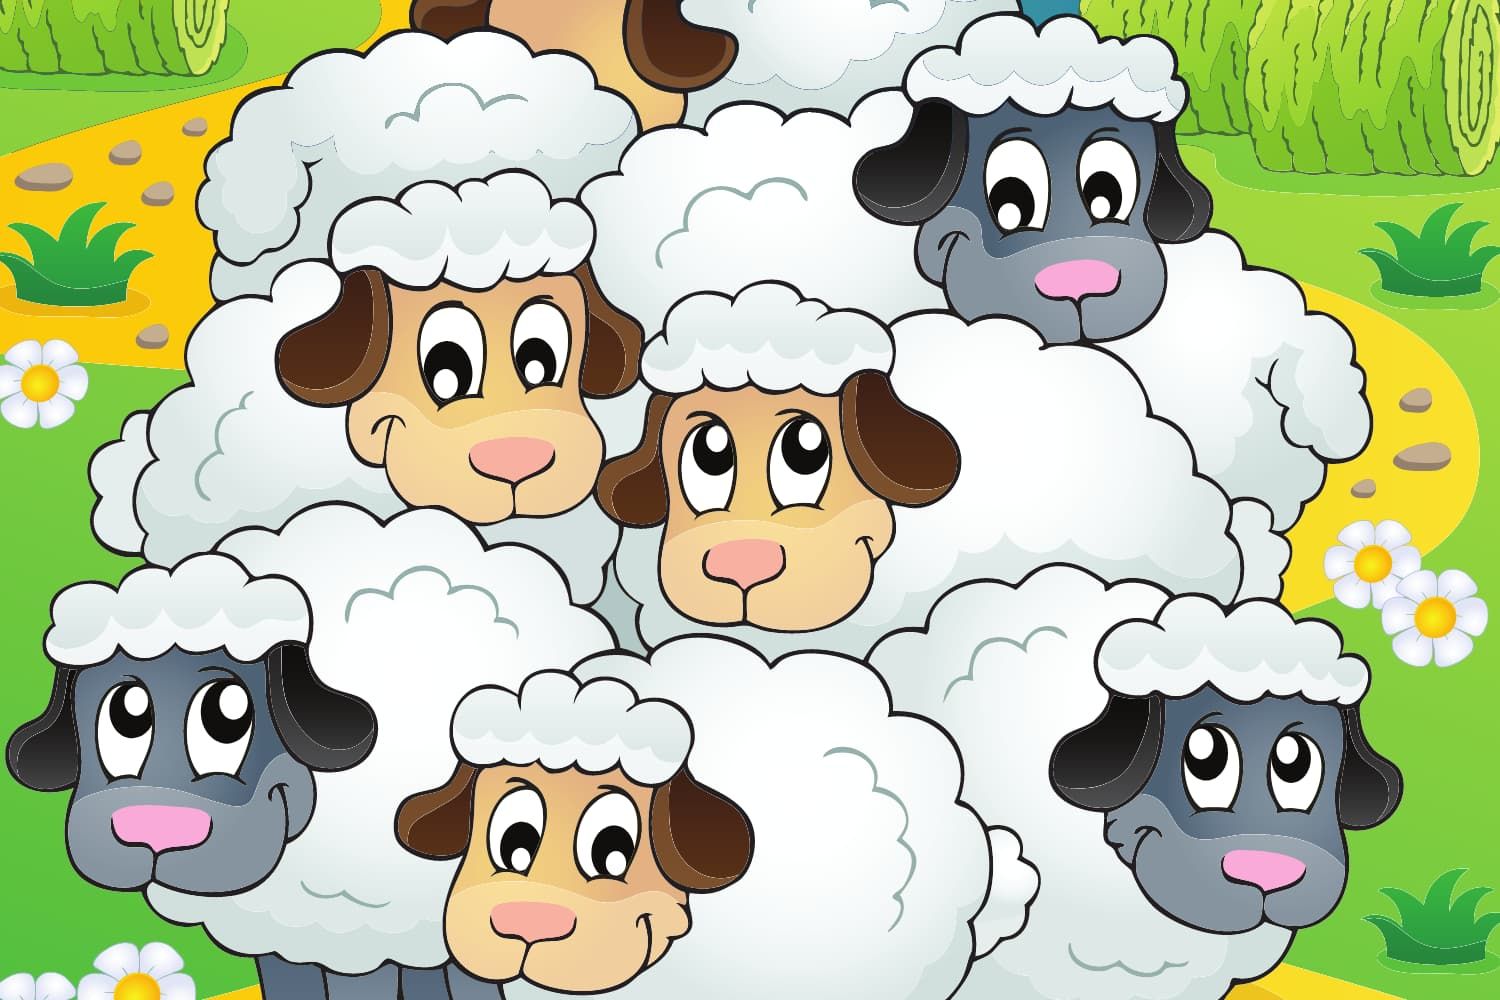 Game%20-%20NT%20Parable%20of%20the%20lost%20sheep%20-%20Count%20the%20sheep-b72376df Love / heart